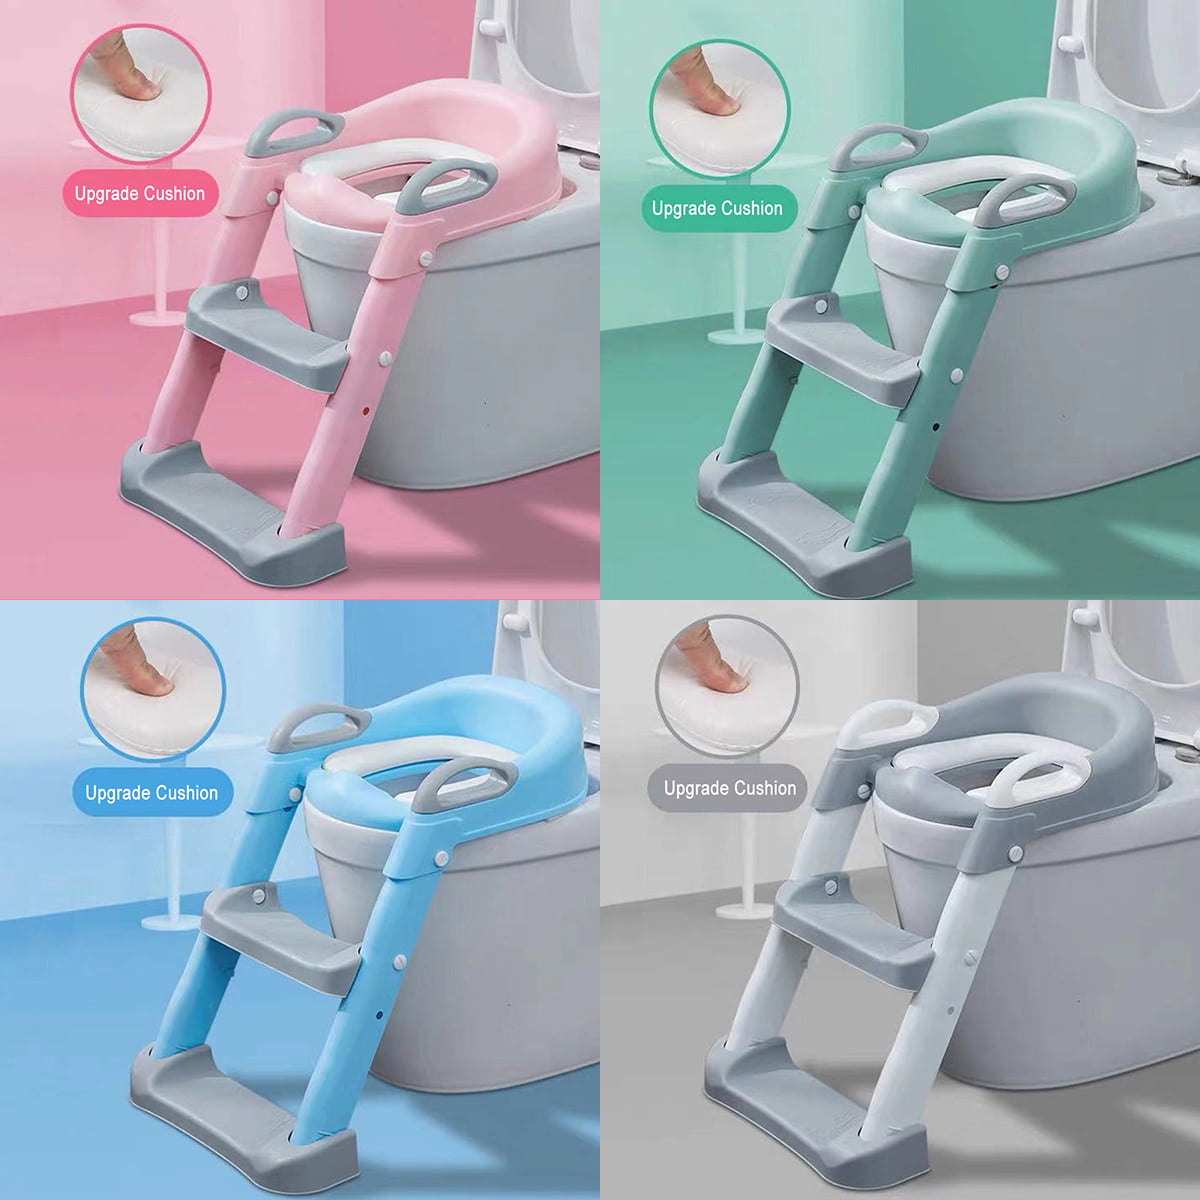 Potty Training Toilet Seat with Step Stool Ladder for Kids Girls Boys Baby and Children Blue AISIMEE Toddlers Toilet Training Seat Chair with Soft Cushion and Anti-Slip Pads Wide Step 